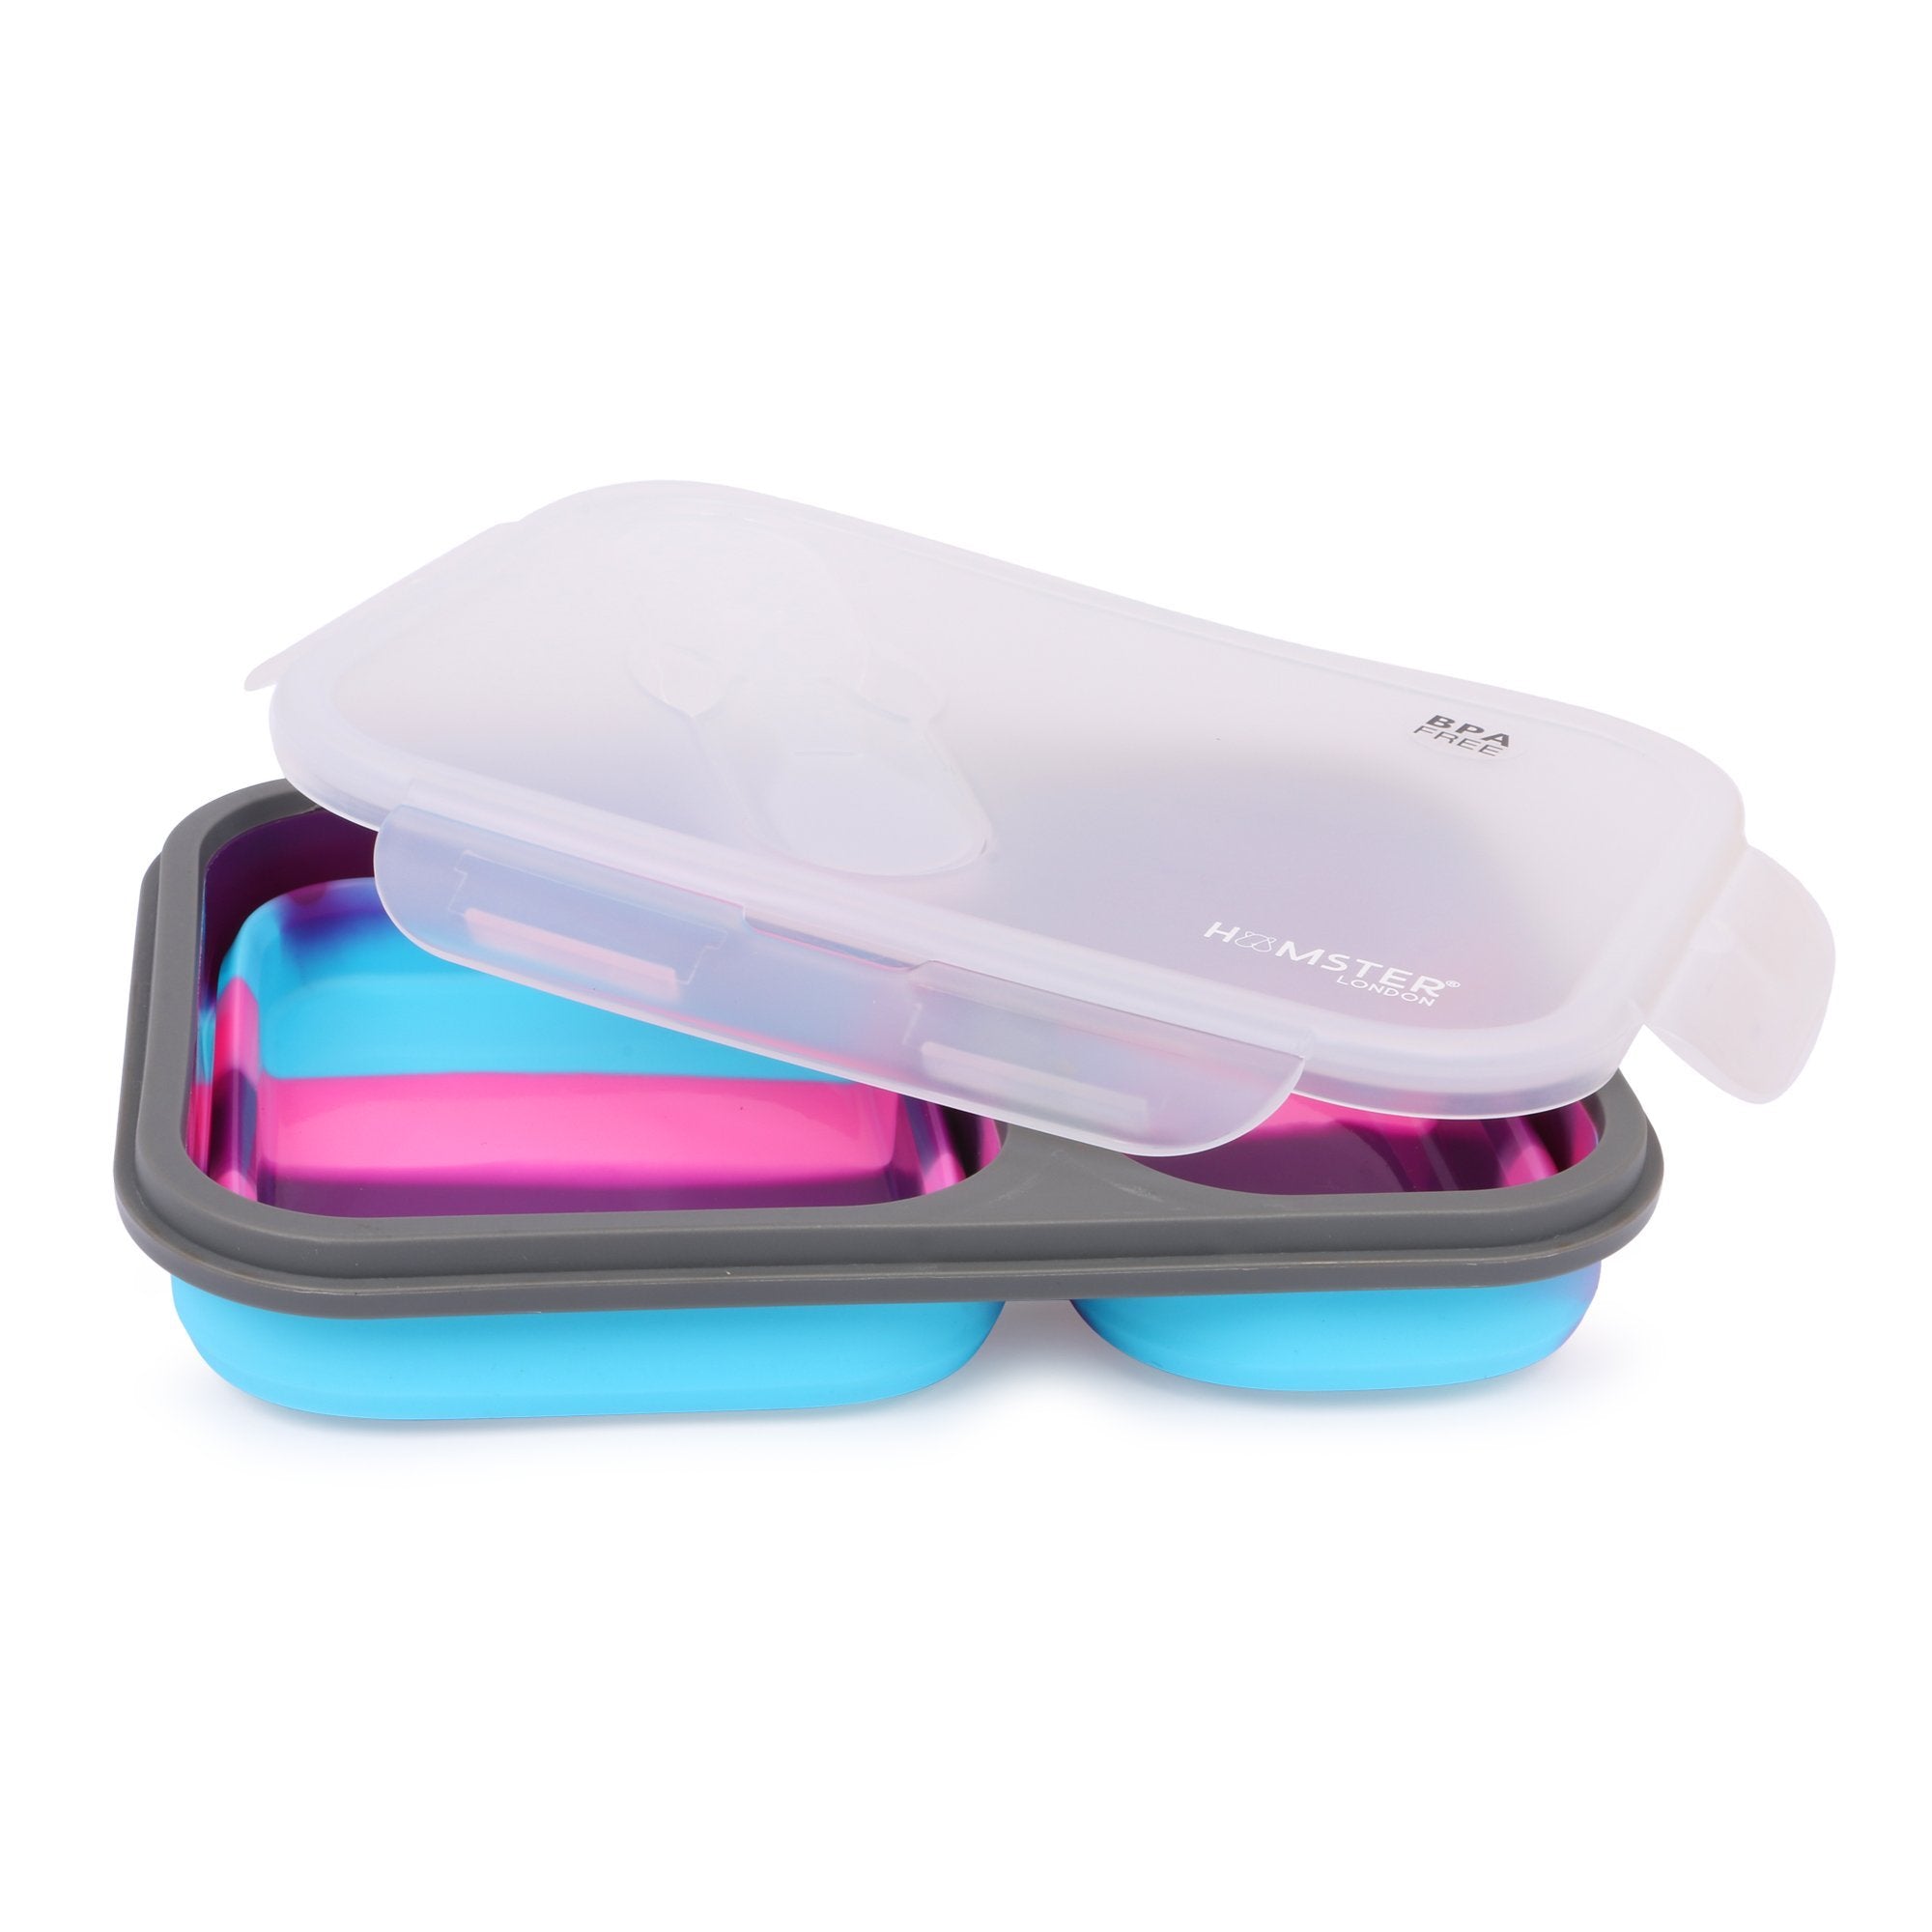 HL Silicon Bendable Tiffin Box Pink All Size Set of 3